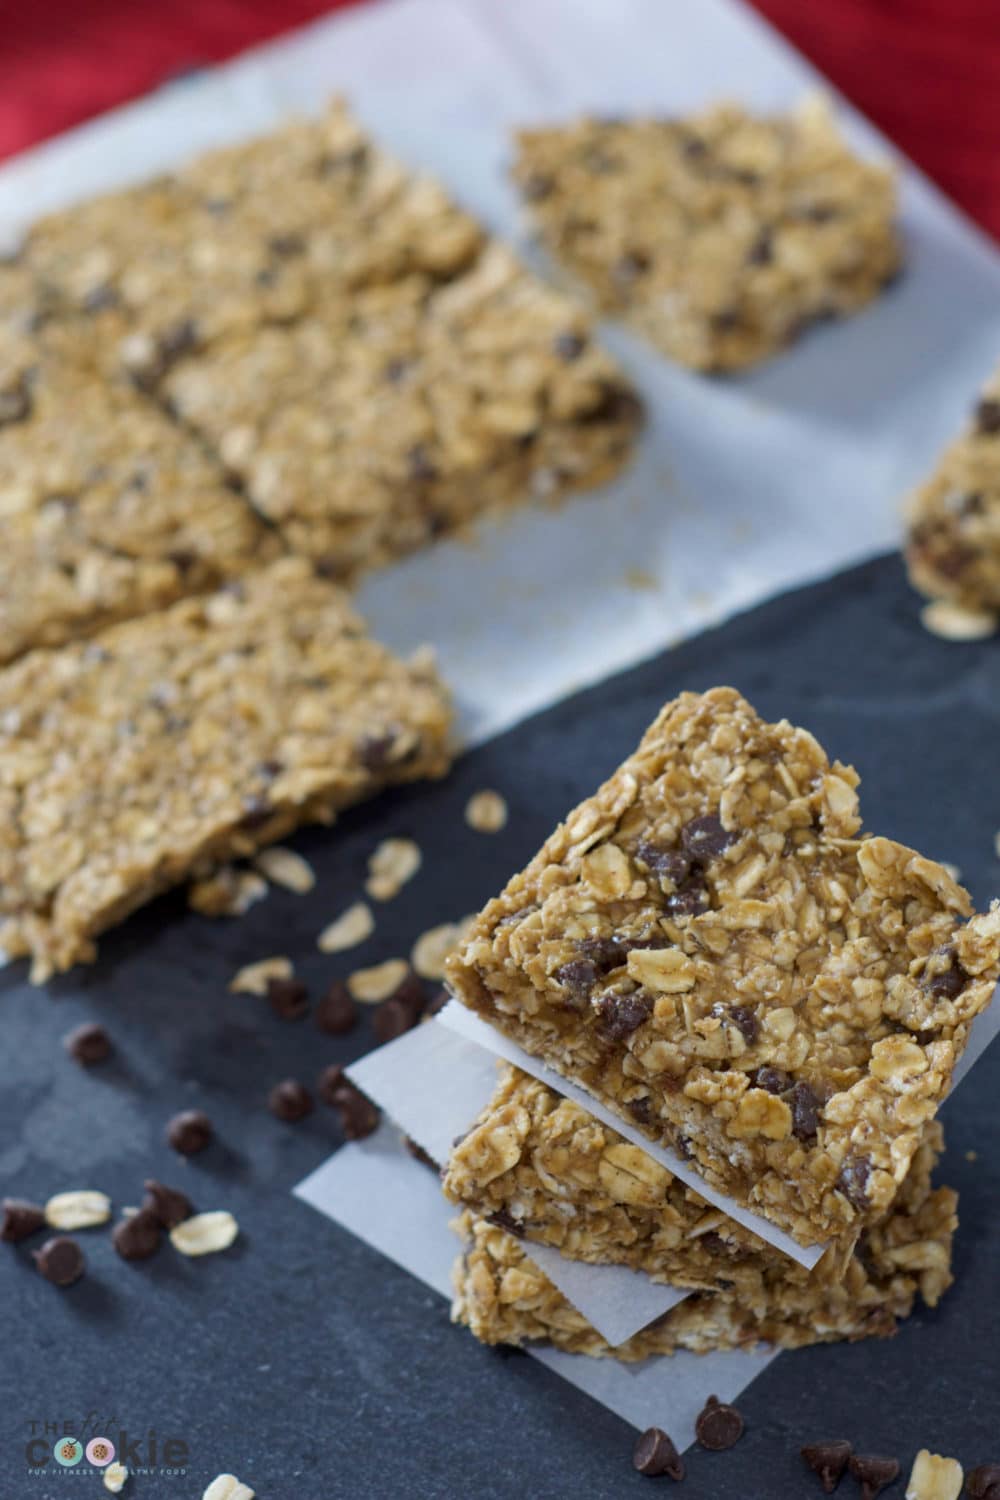 The perfect after-school sweet treat: No-Bake Chocolate Chip Oat Bars - #ad @BobsRedMill @thefitcookie #BRMOats #glutenfree #vegan 